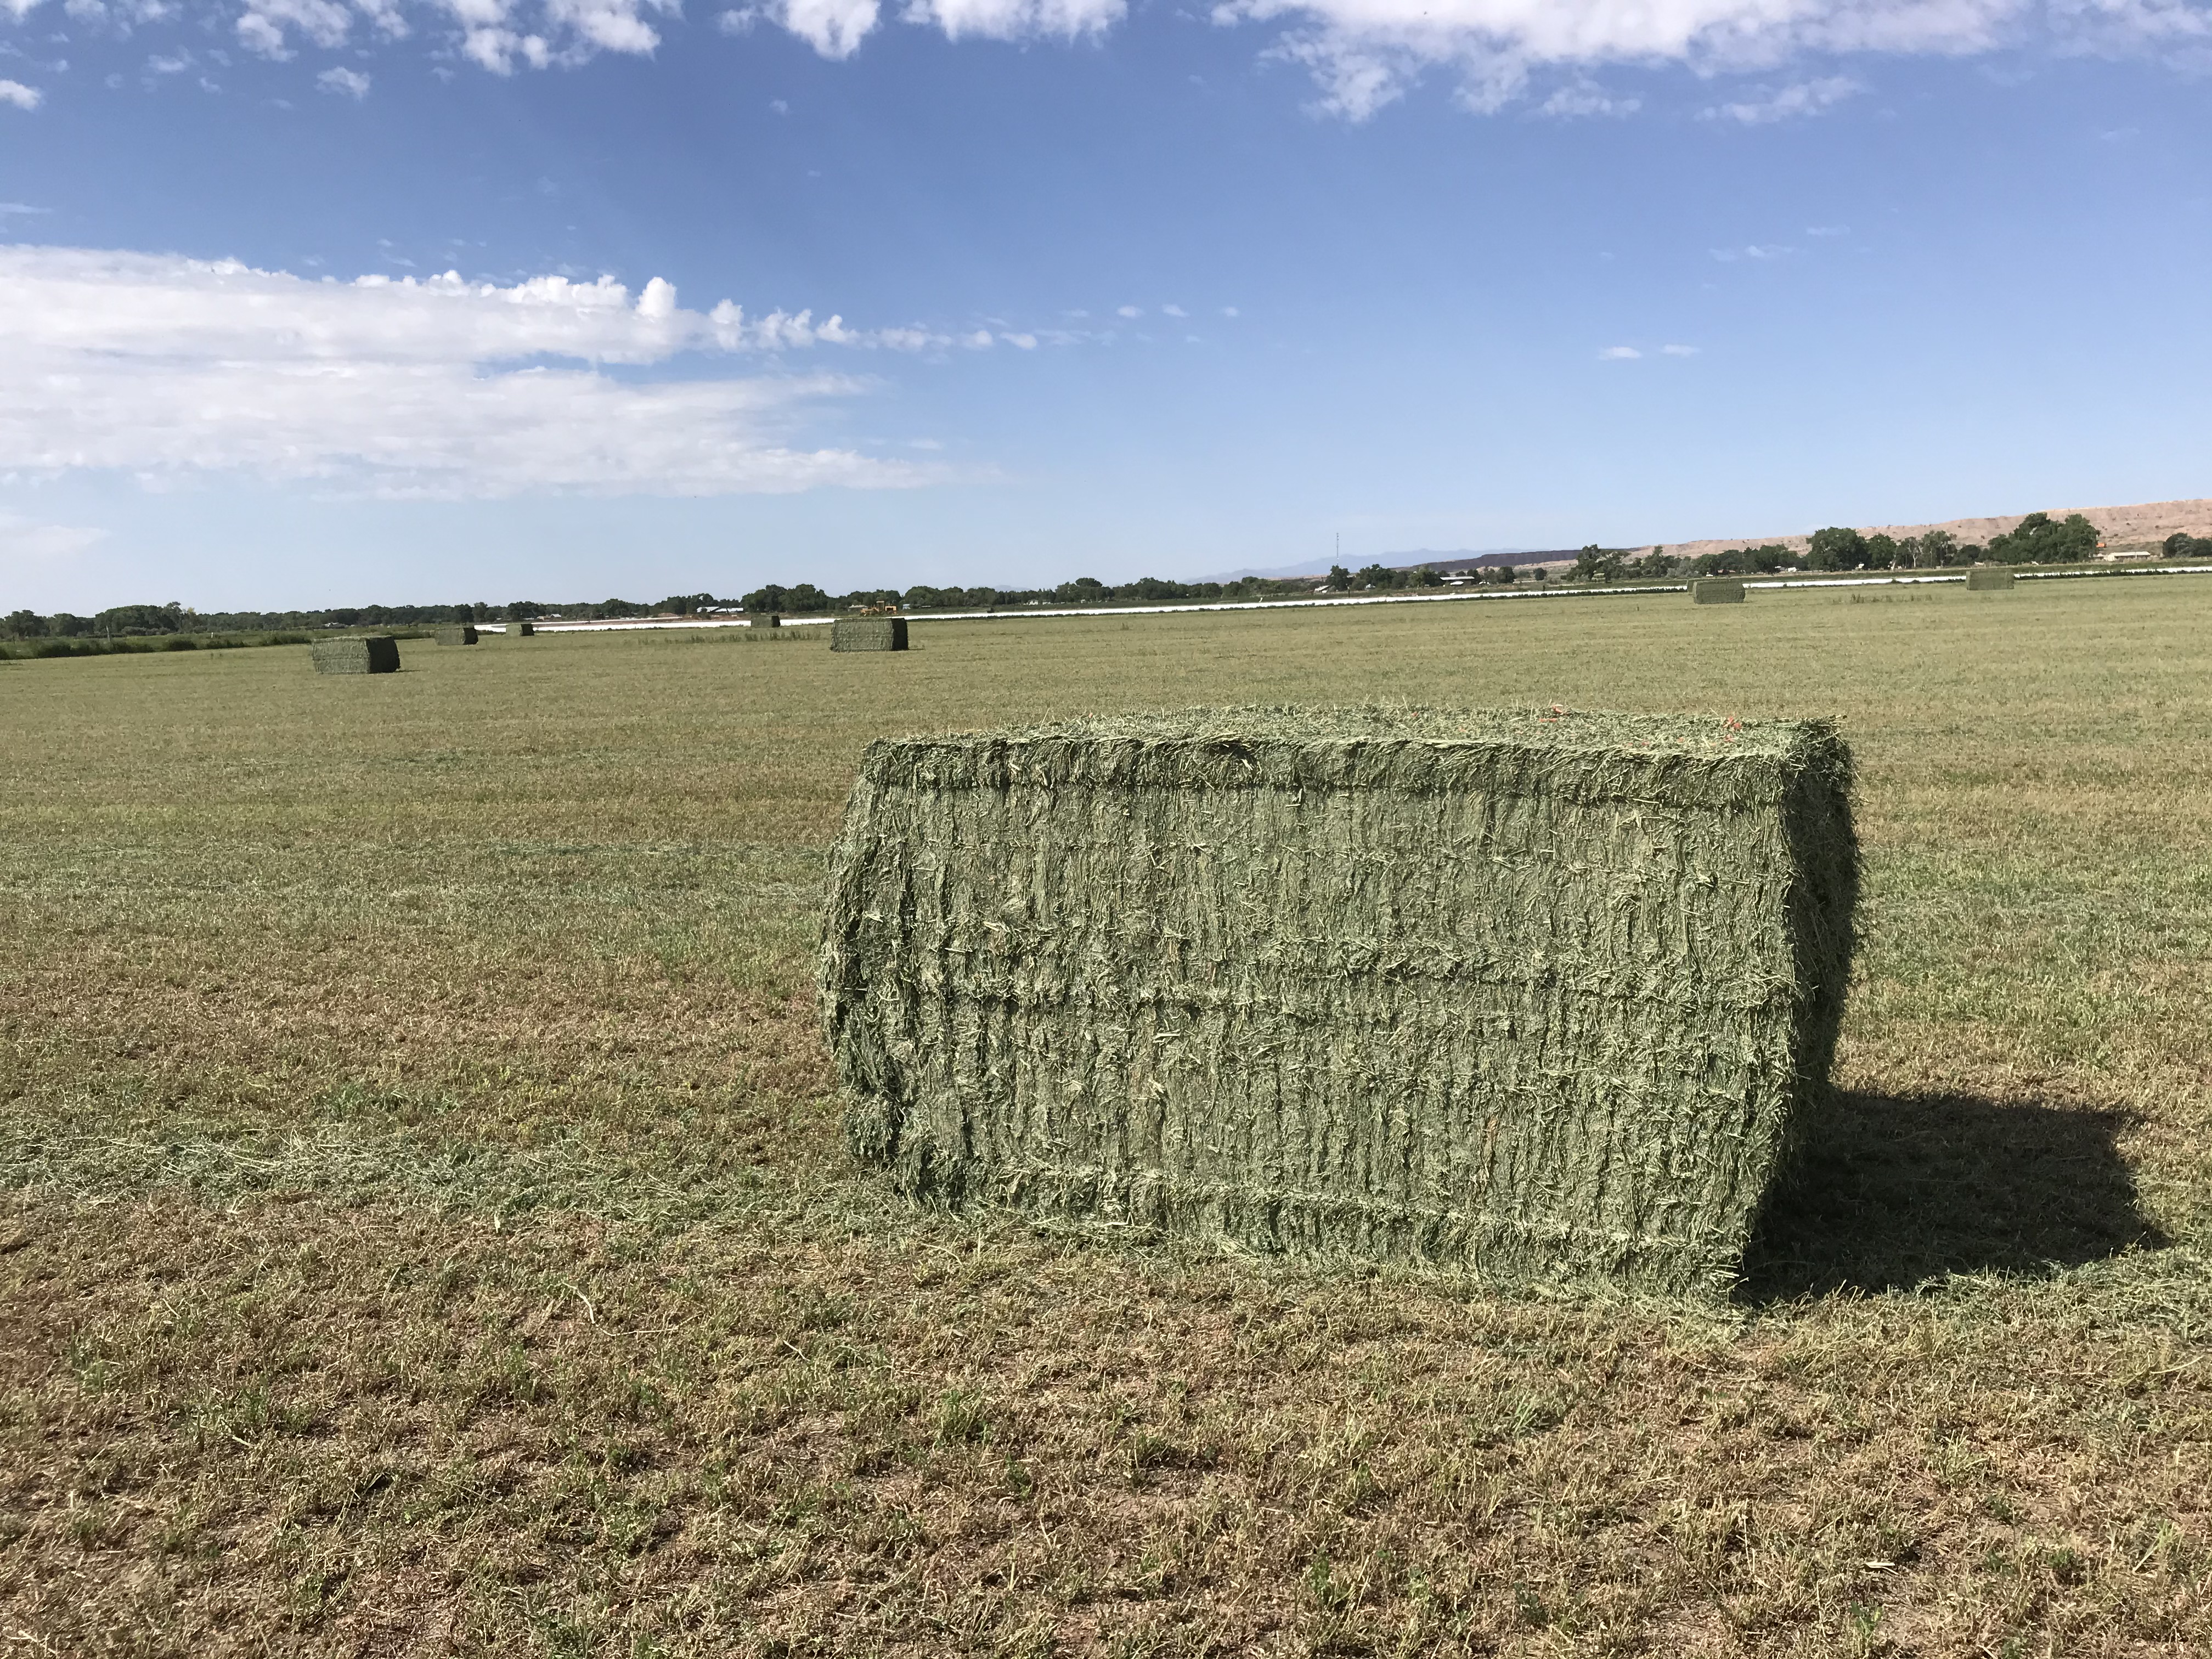 Photo of a hay bale